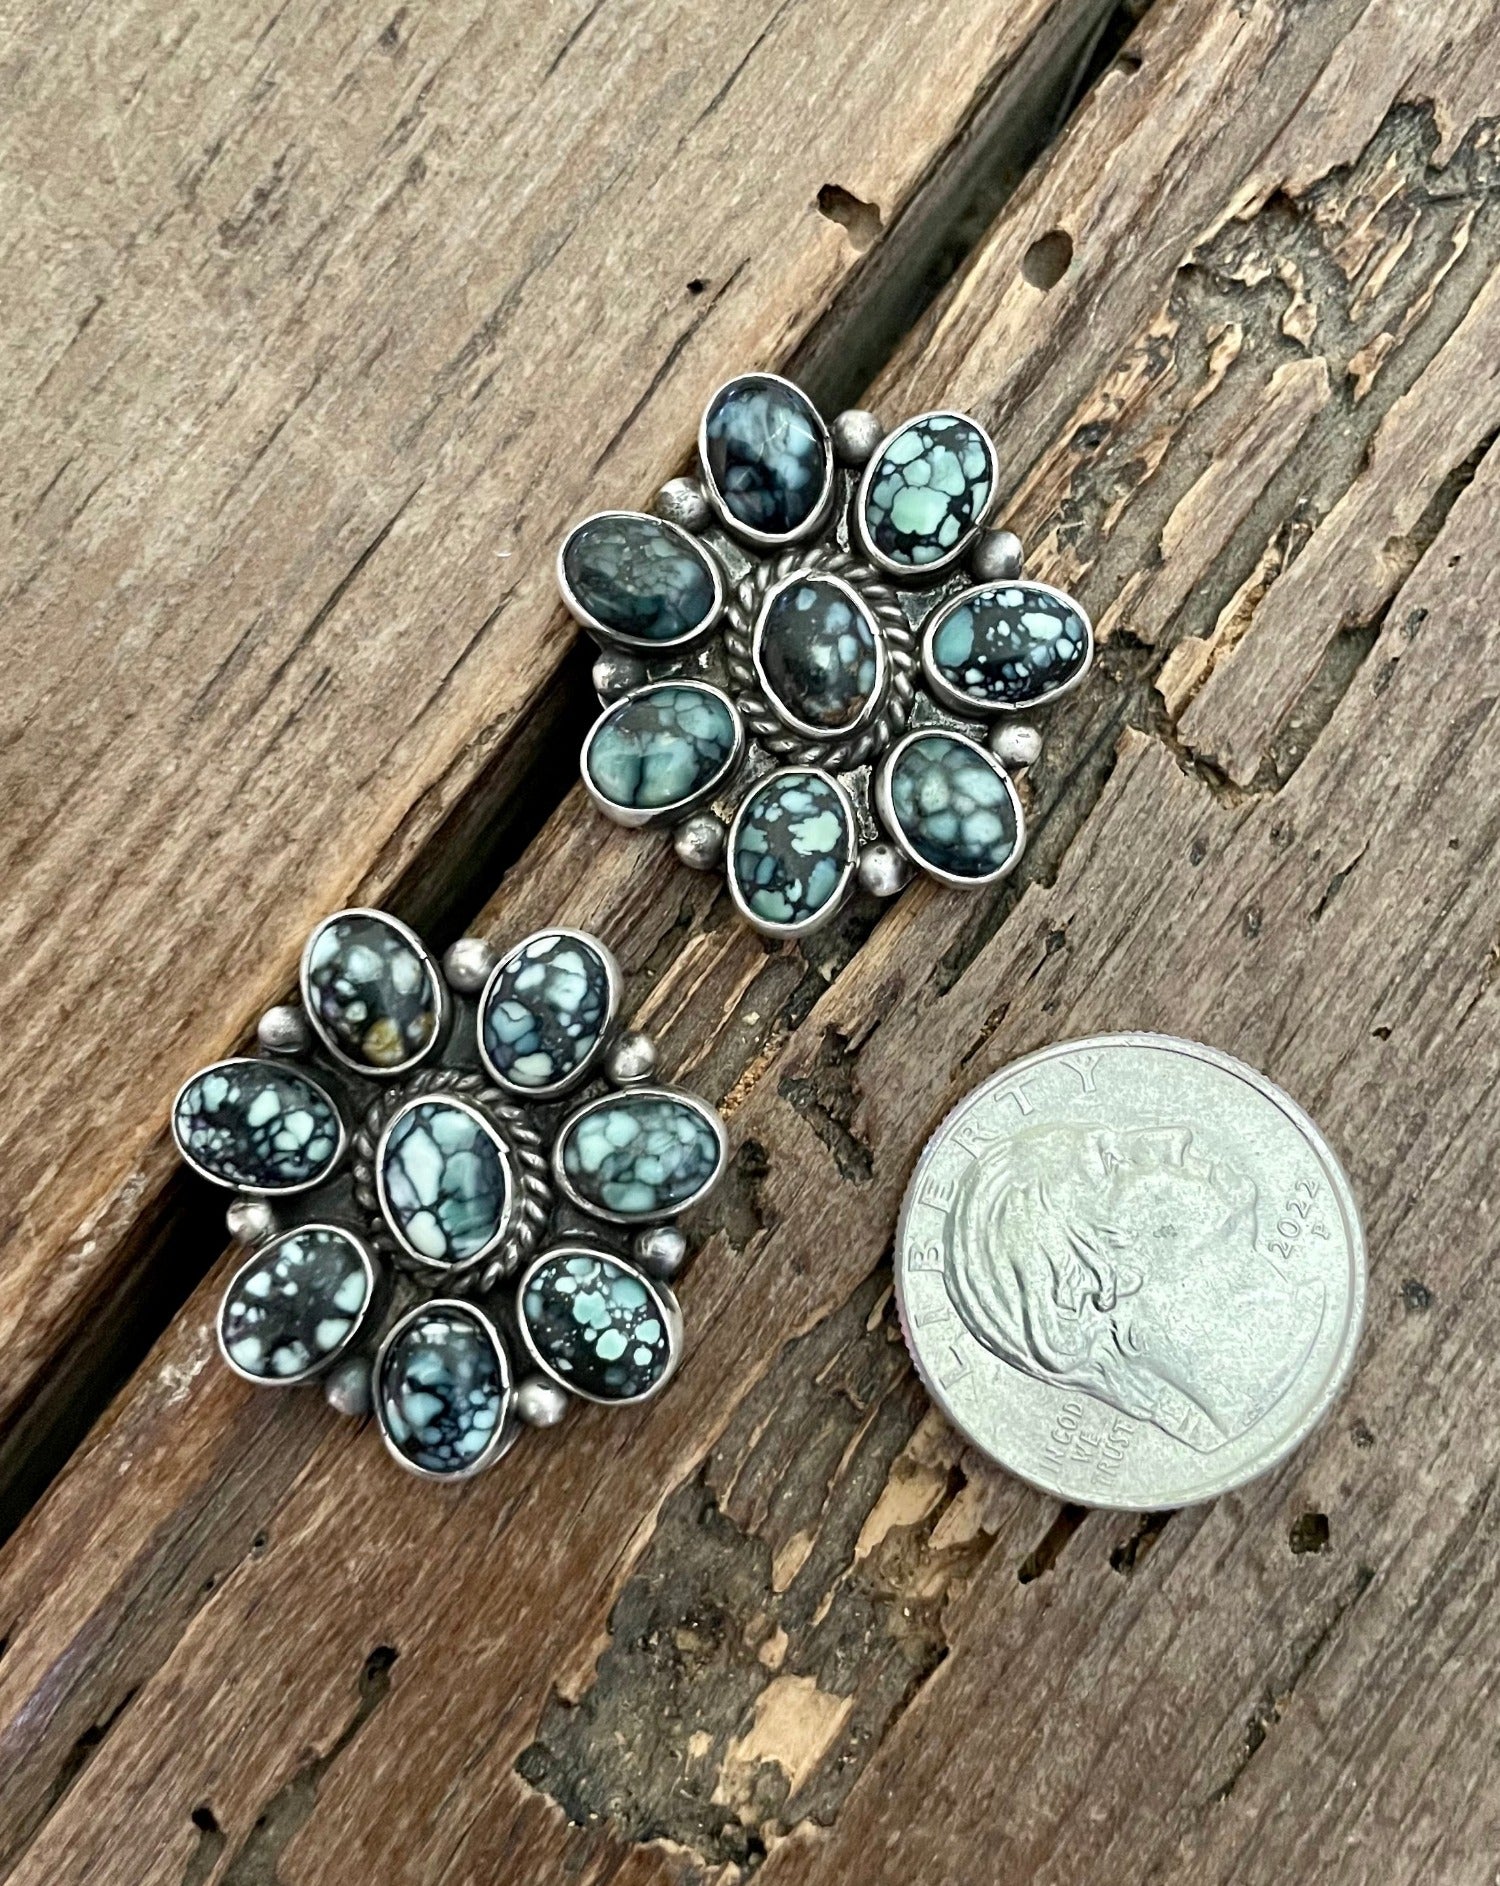 New Lander Turquoise Cluster Earrings with quarter for size comparison